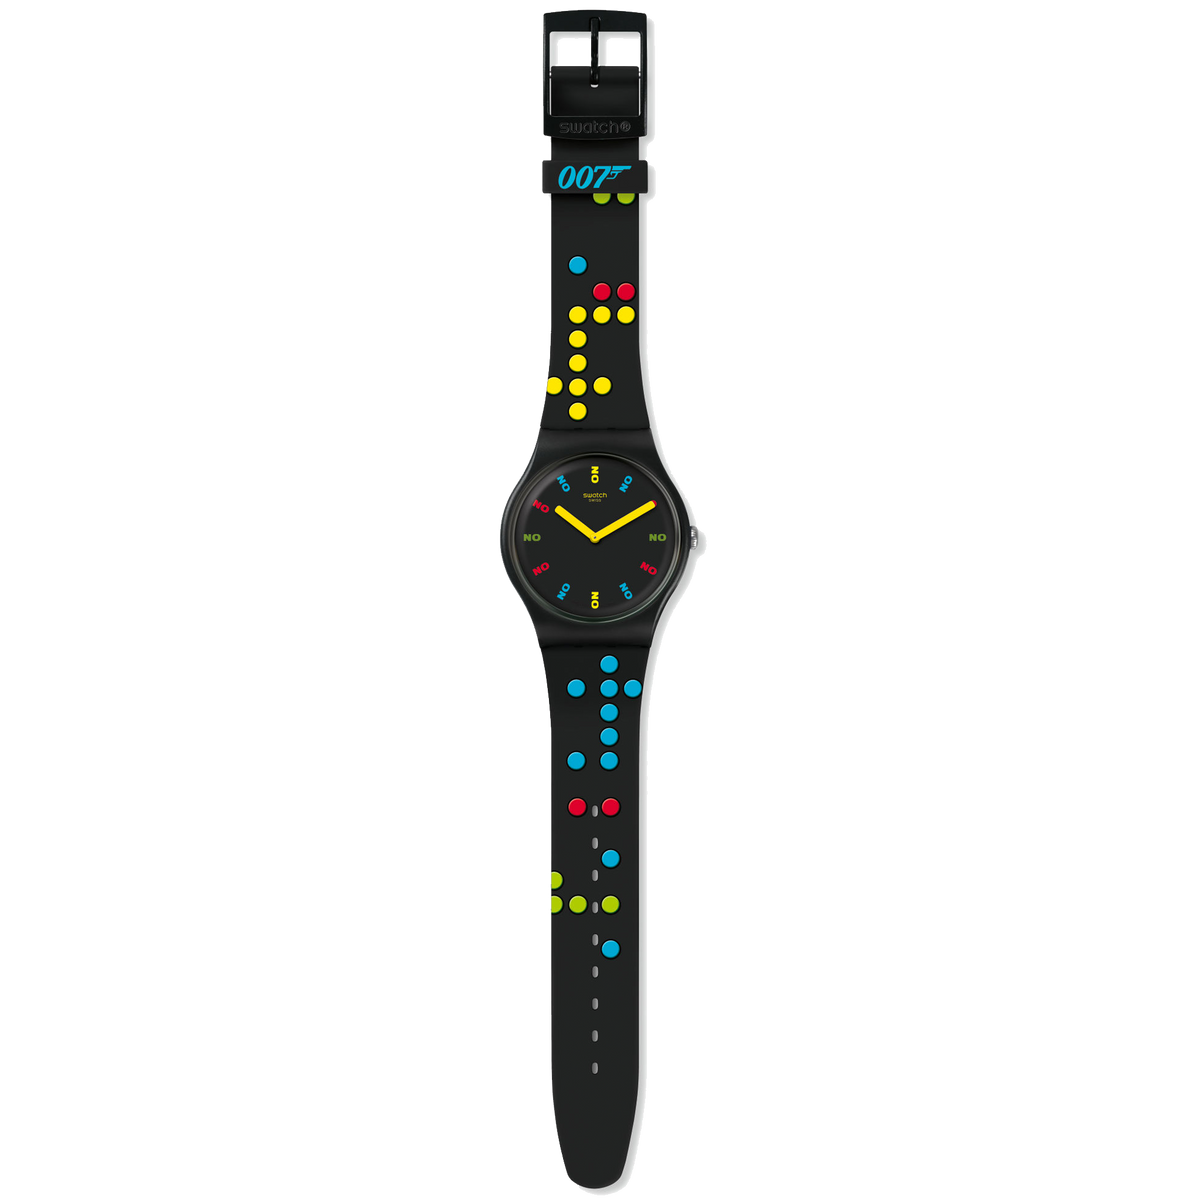 Swatch Watch - 007 Edition - Dr No 1962